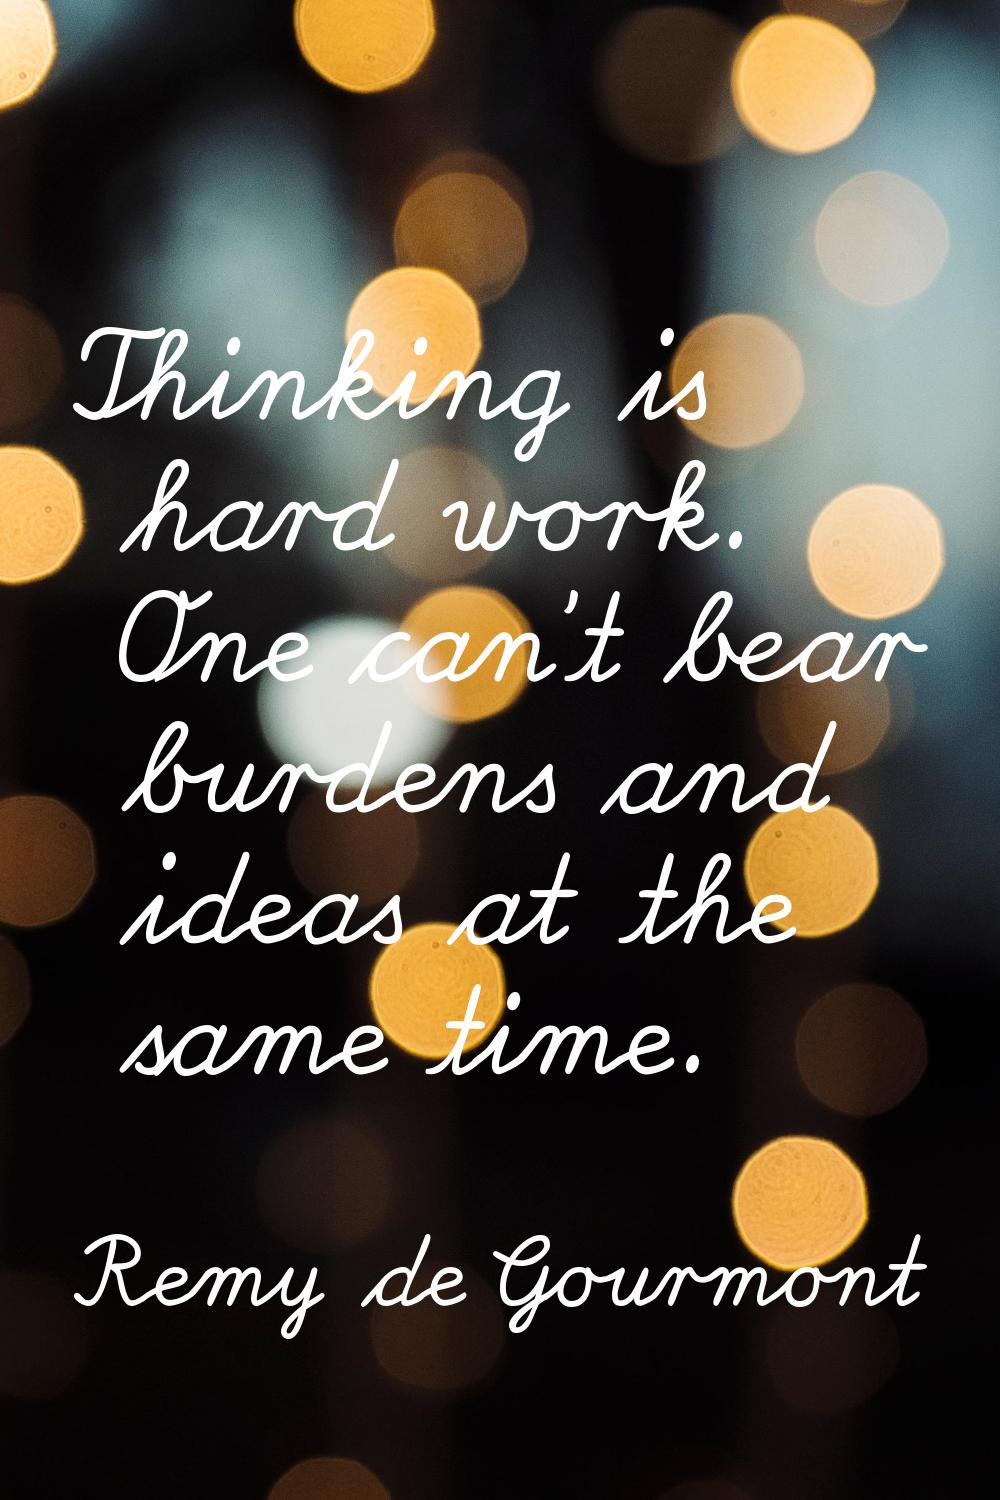 Thinking is hard work. One can't bear burdens and ideas at the same time.